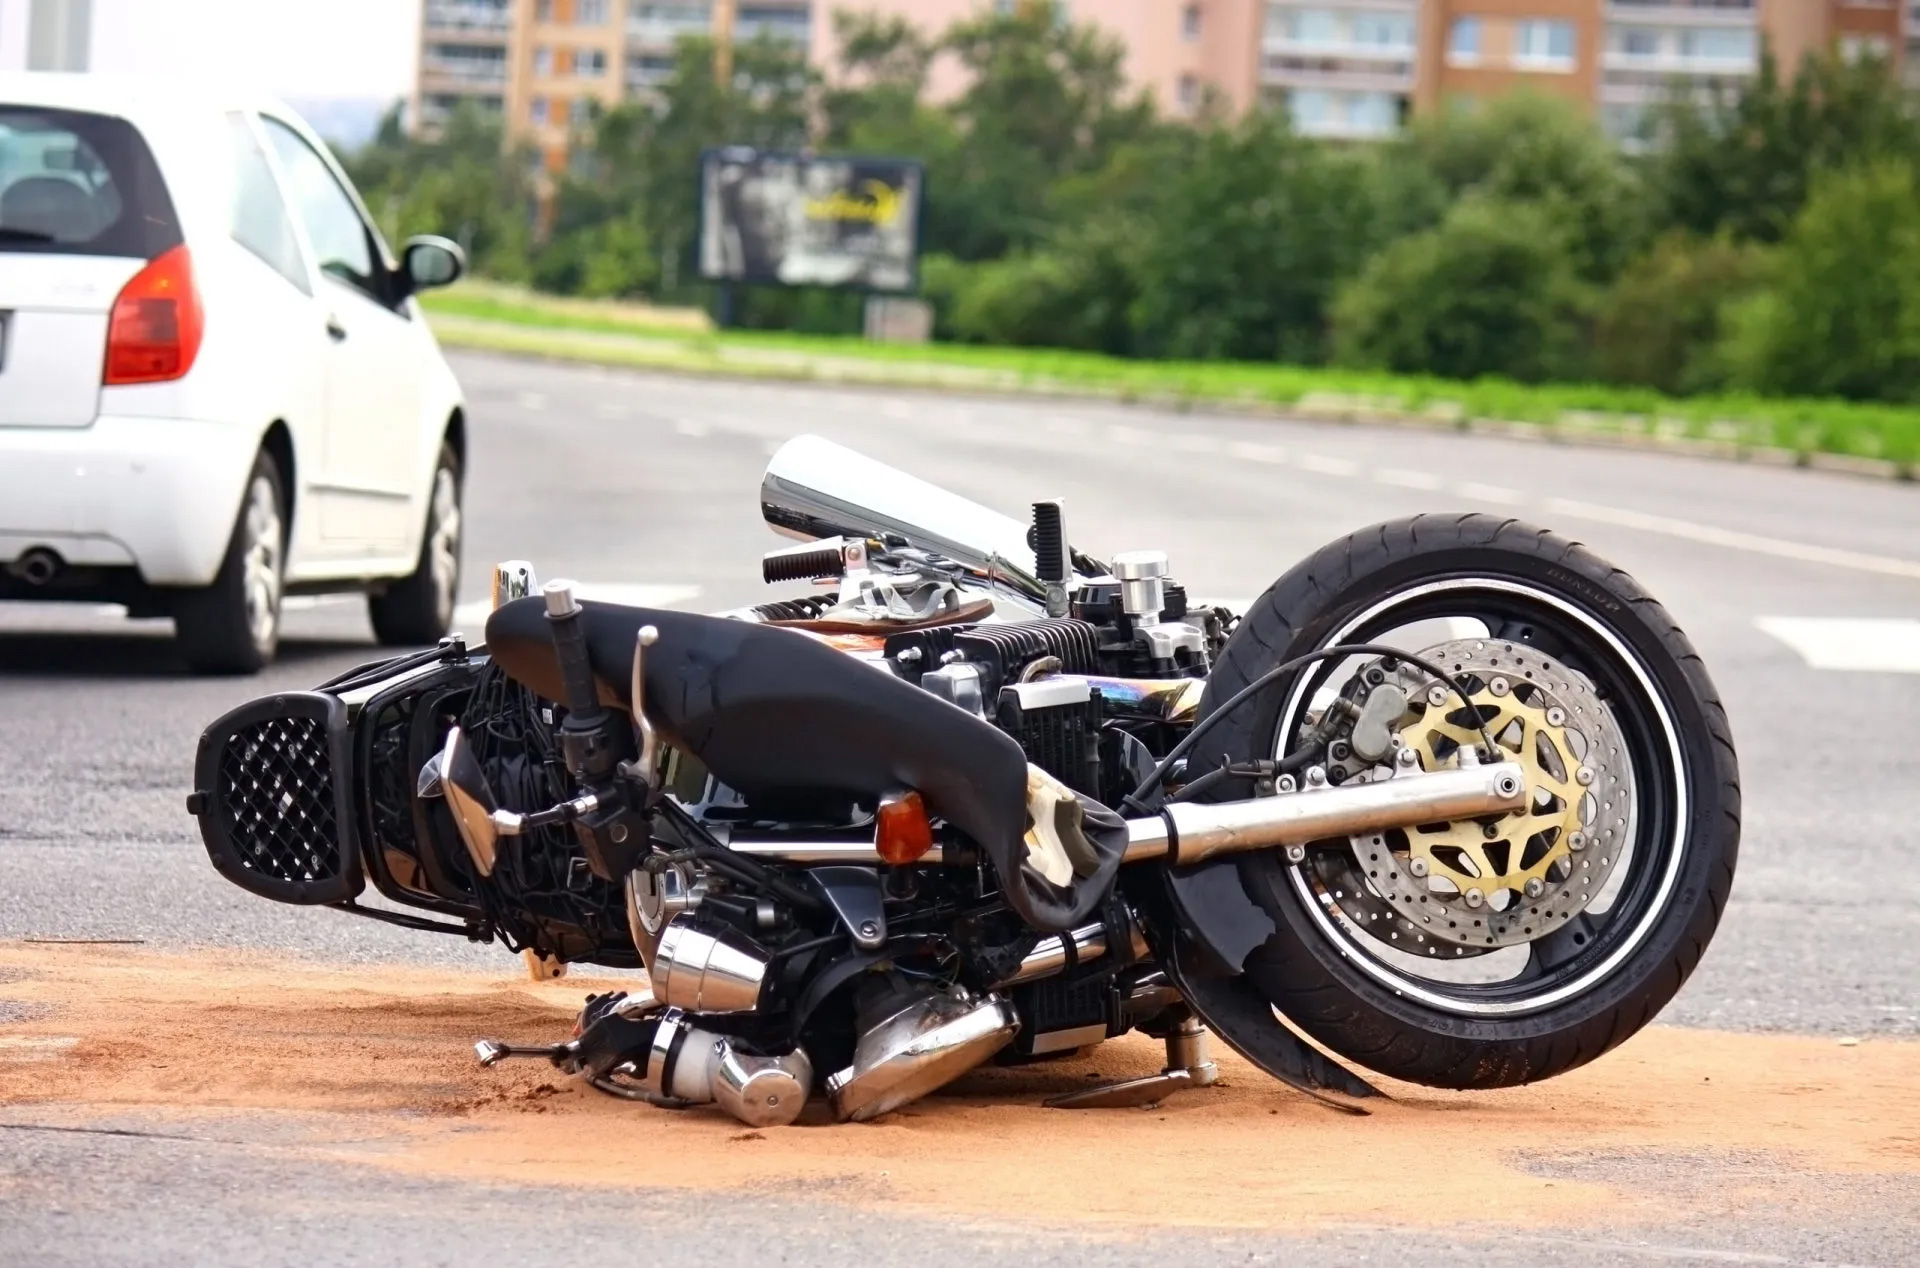 motorcycle rests on its side in the middle of a road after an accident